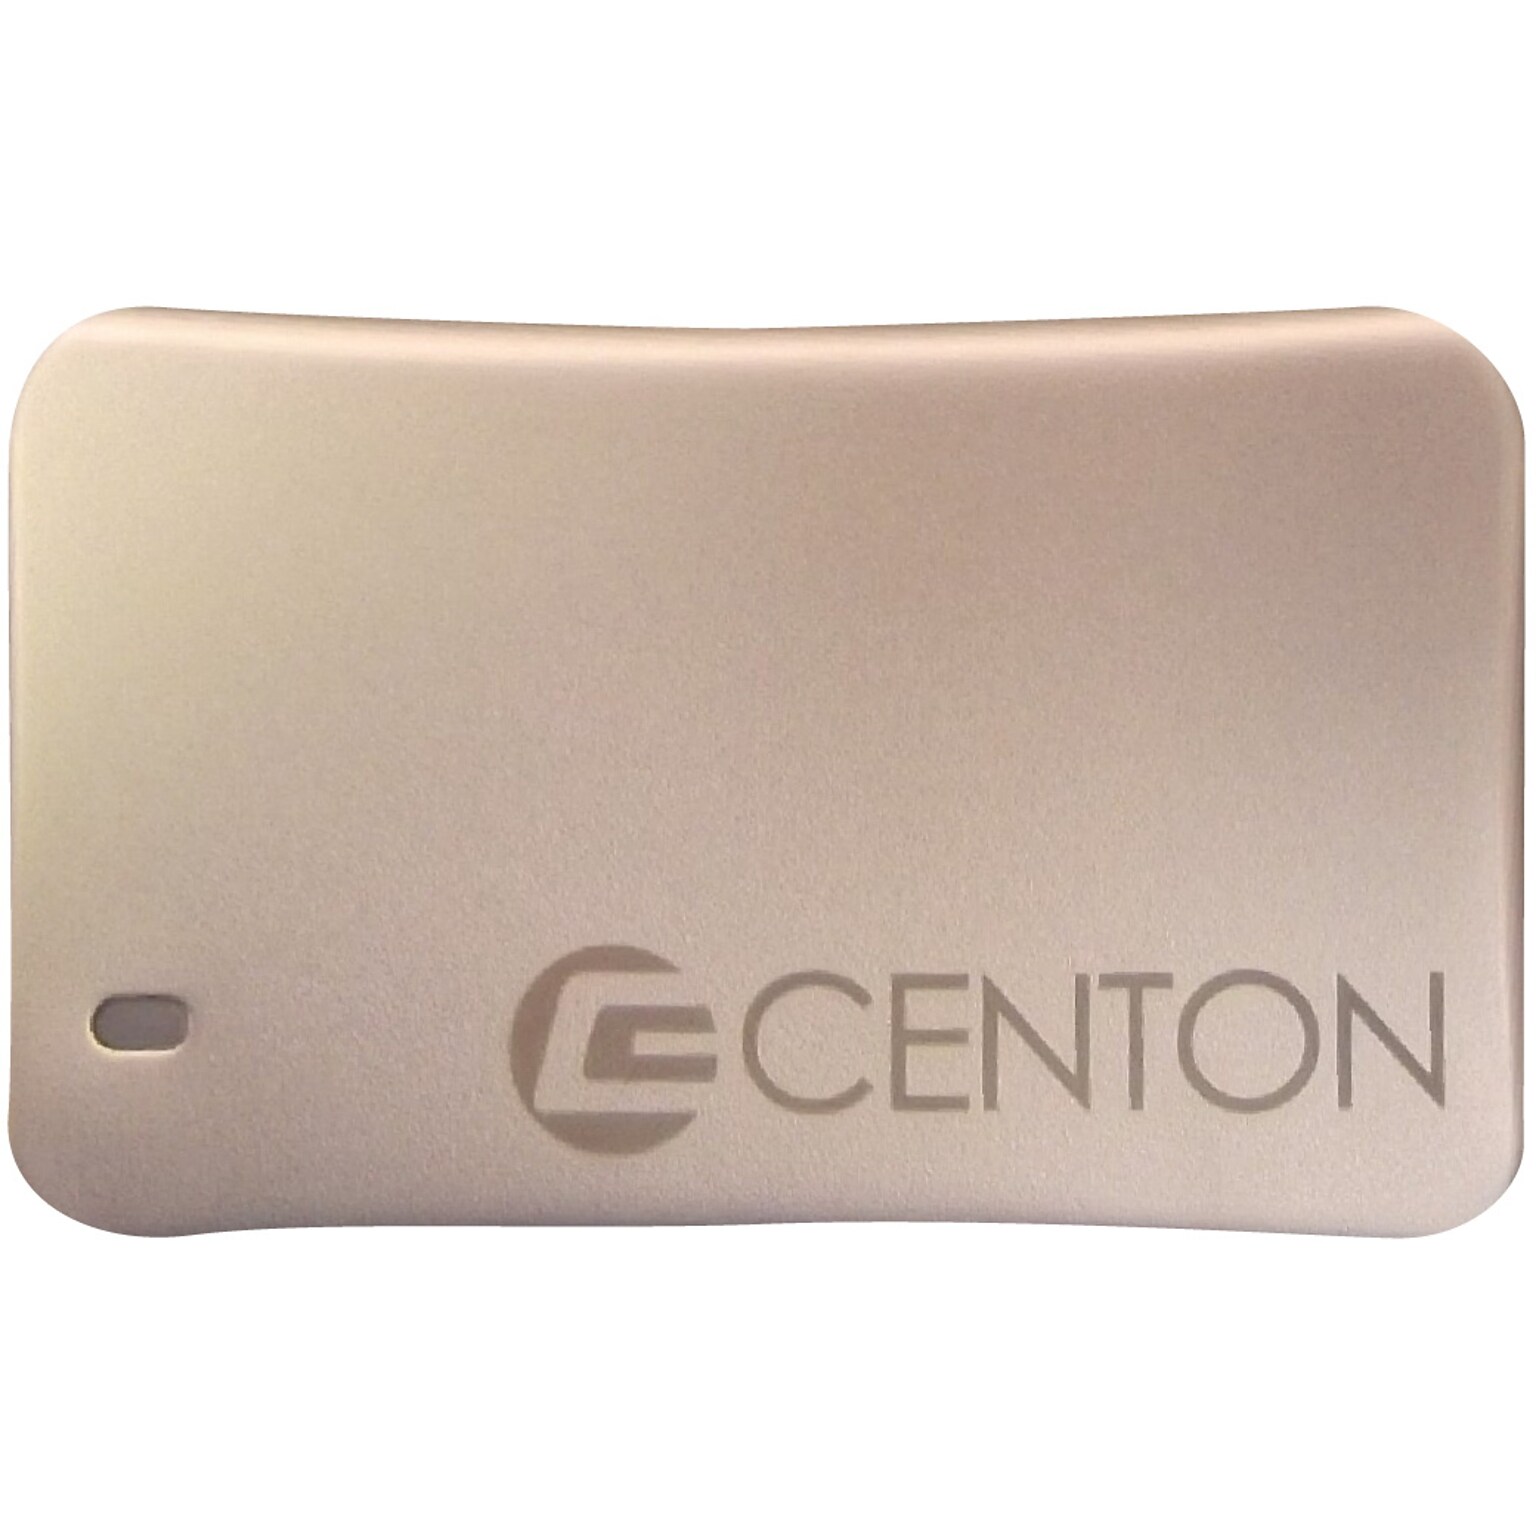 Centon S1-S3M-480.1 480GB USB-C External Solid State Drive